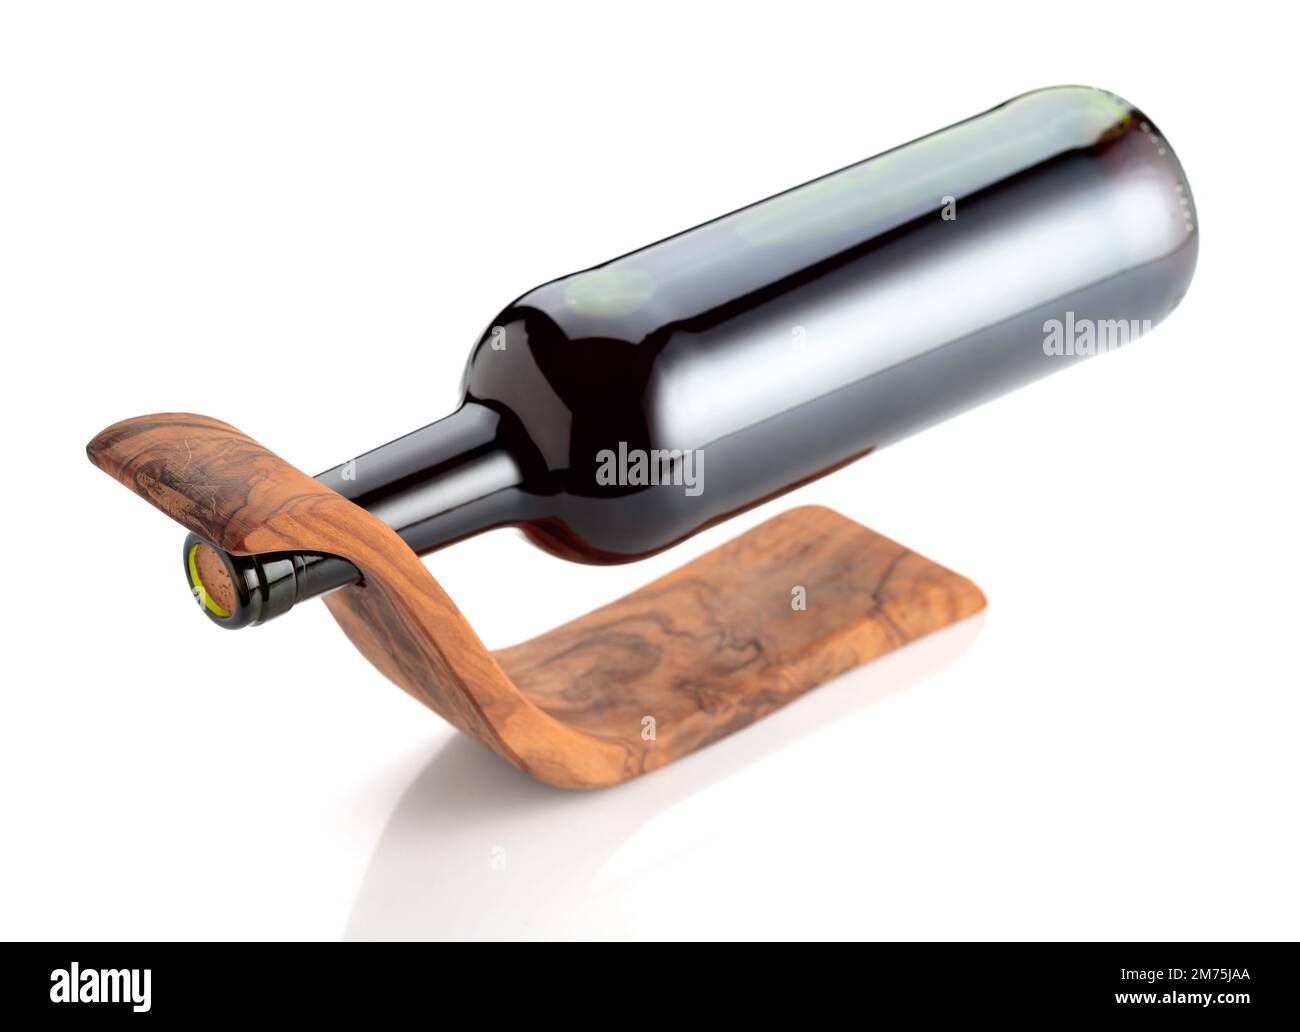 https://c8.alamy.com/comp/2M75JAA/bottle-of-red-wine-in-a-wooden-bottle-holder-is-isolated-on-a-white-background-2M75JAA.jpg